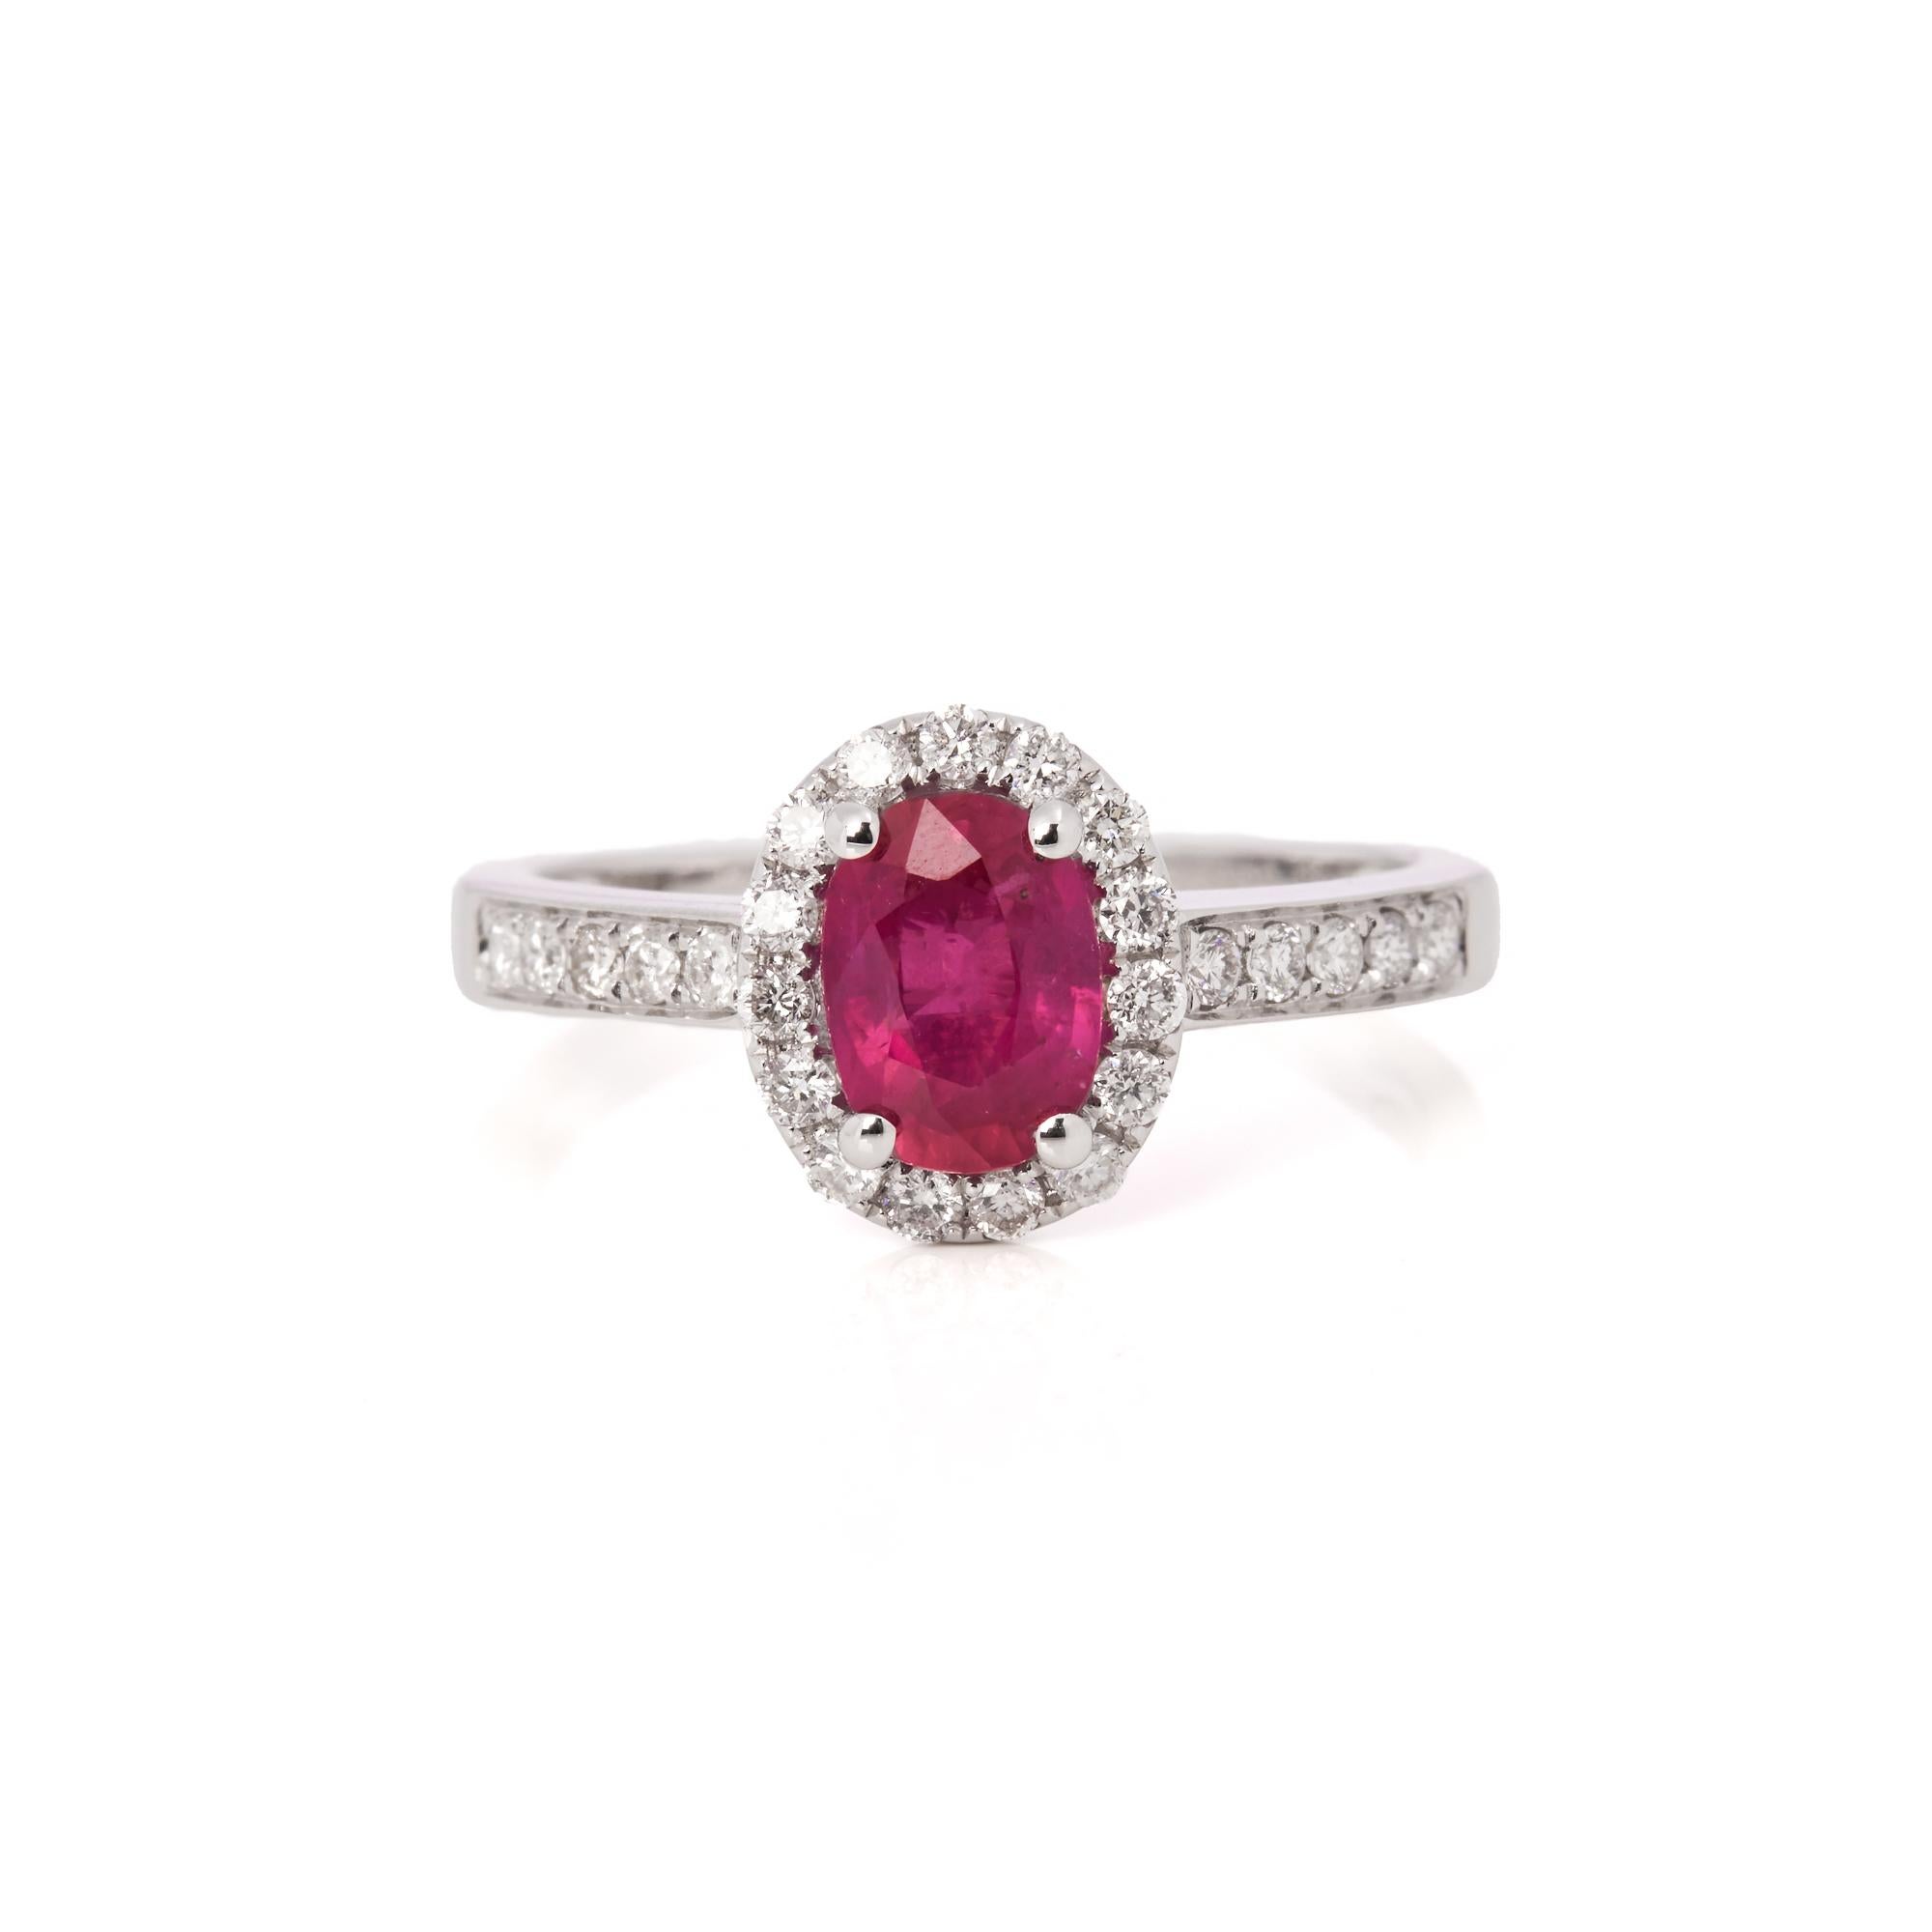 This ring is from the private collection of gemstone jewellery individually designed by David Jerome. It features an untreated oval cut ruby set with diamonds. Accompanied by an IGI gem certificate. UK ring size N. EU ring size 54. US ring size 7. 